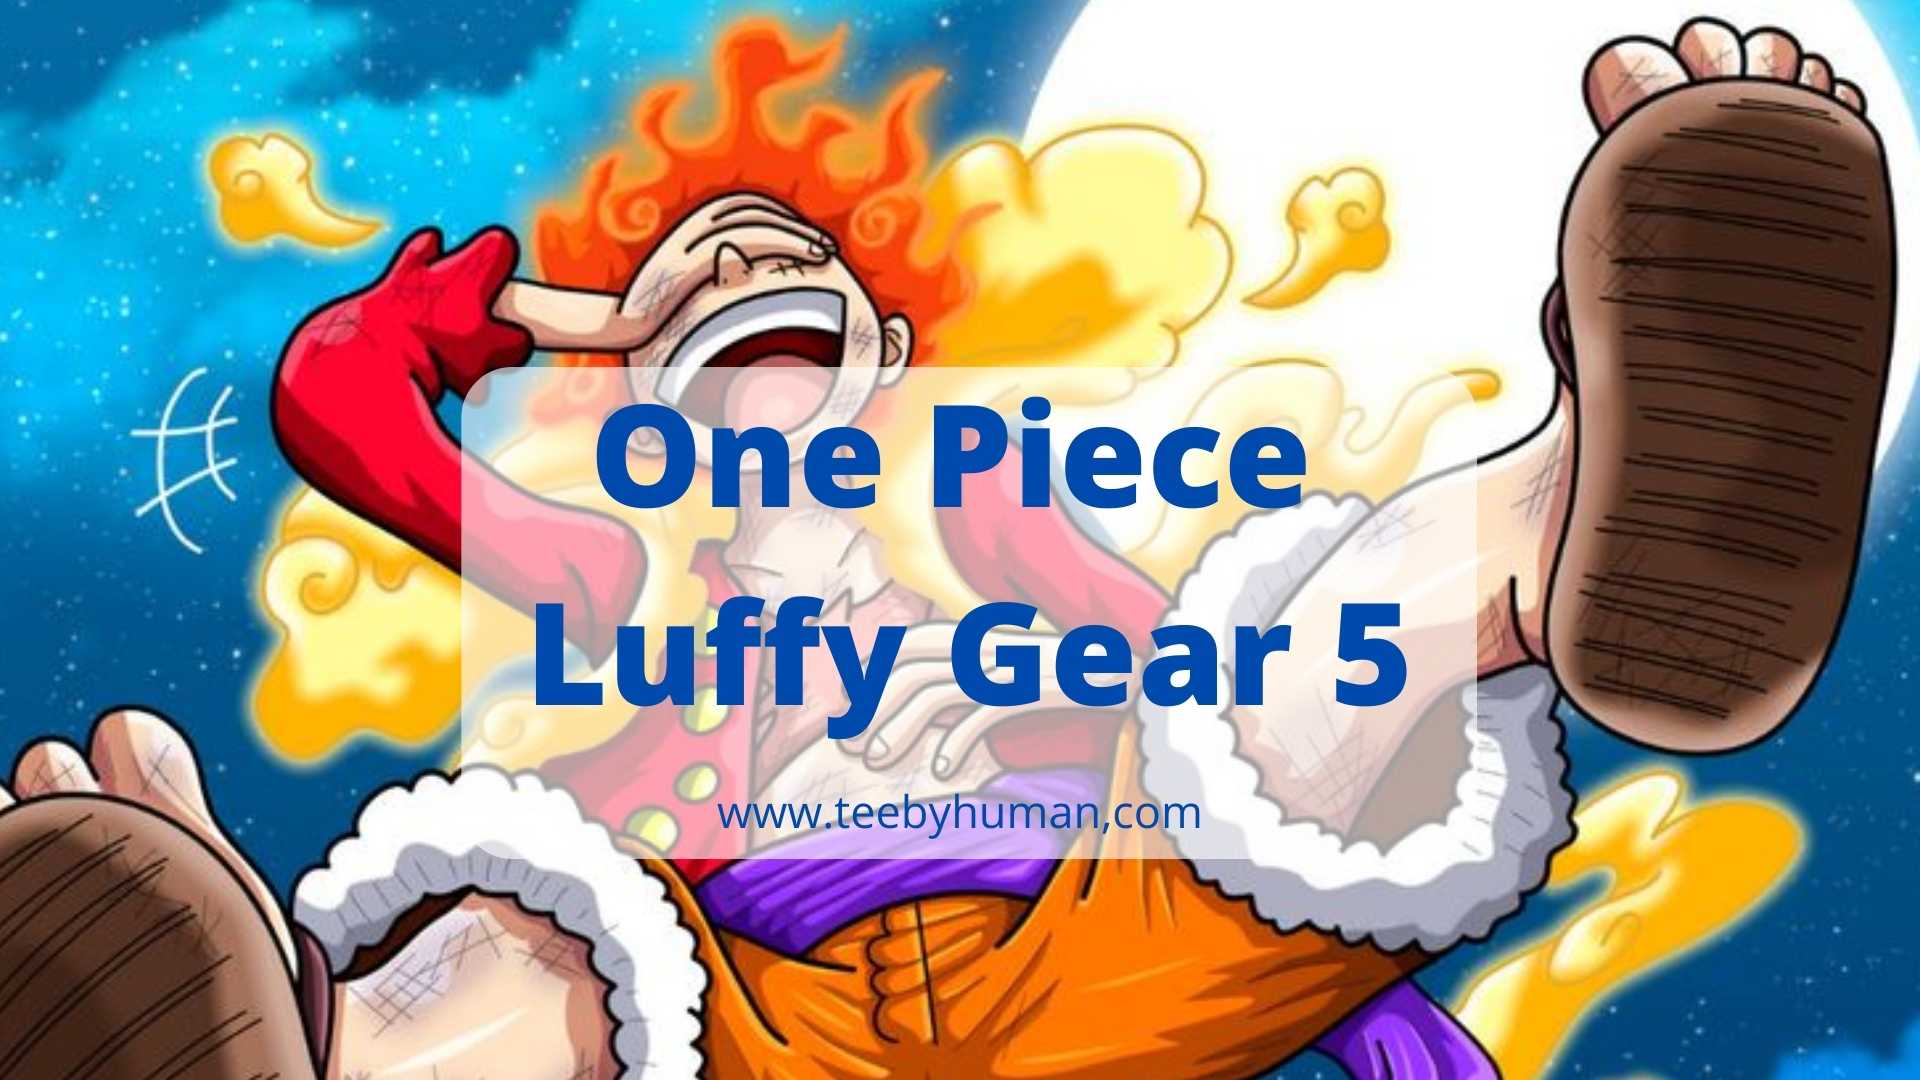 One Piece: Things You Should Know About Gear 5th Luffy